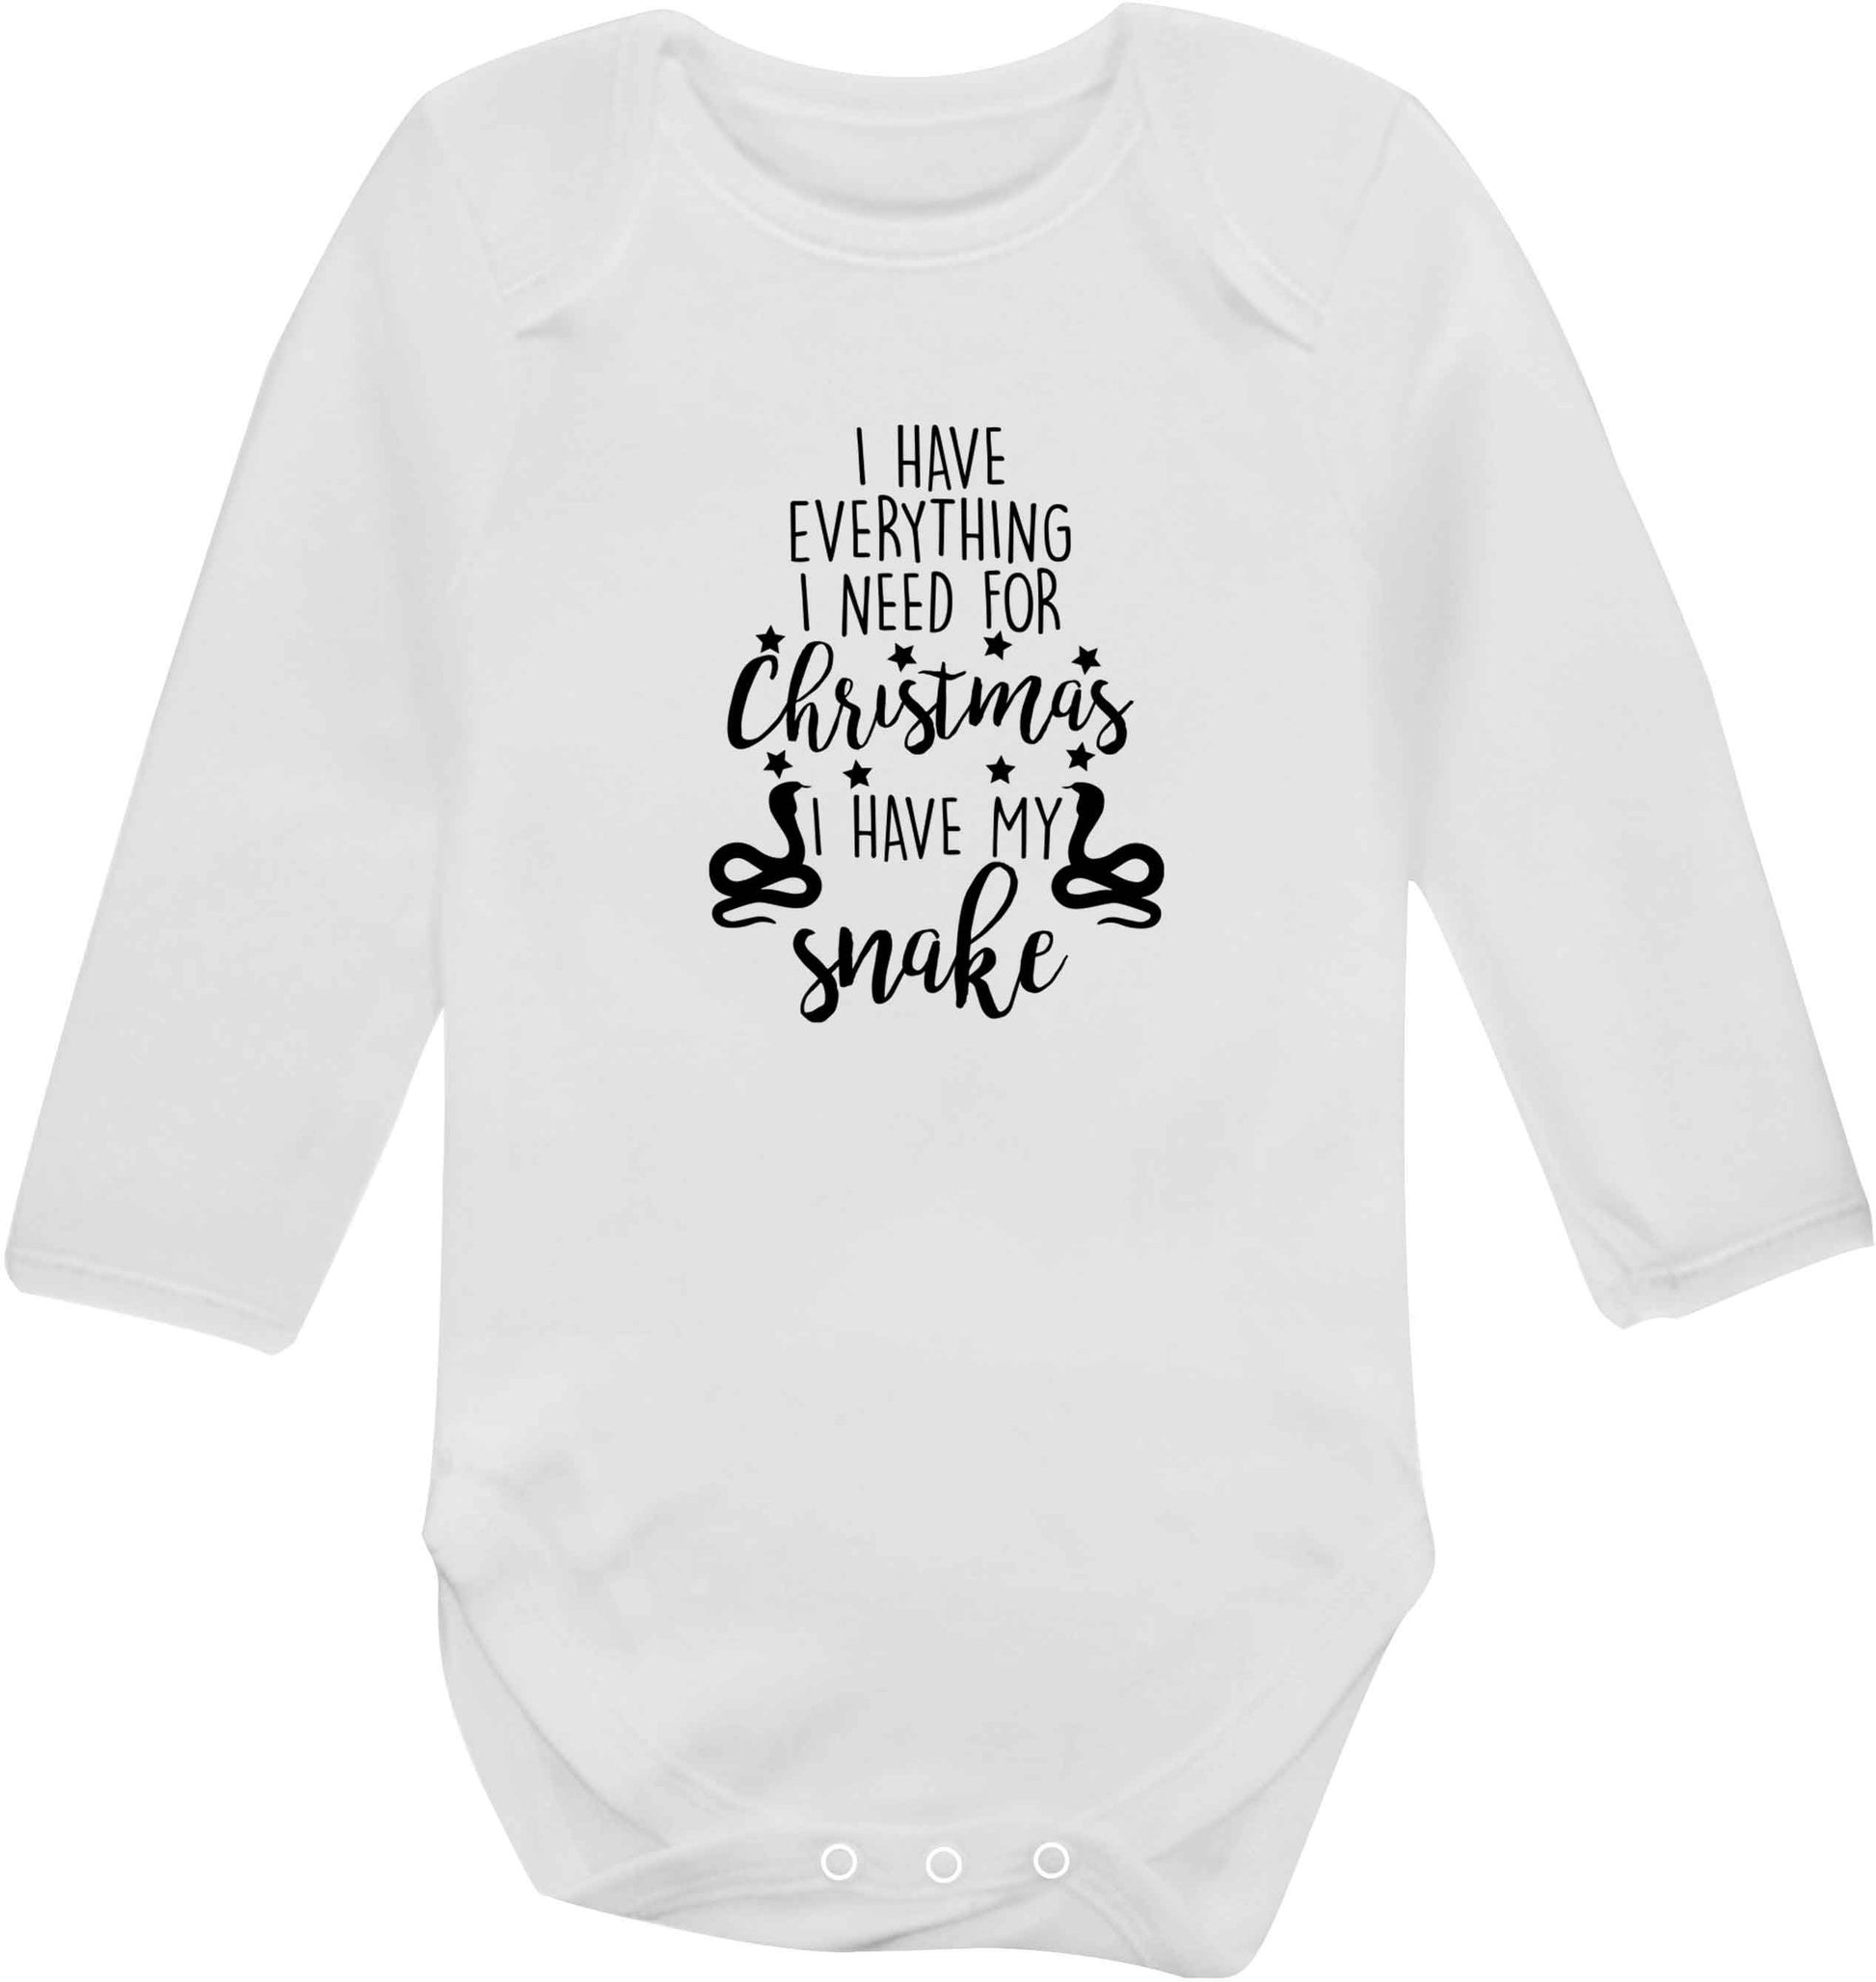 I have everything I need for Christmas I have my snake baby vest long sleeved white 6-12 months